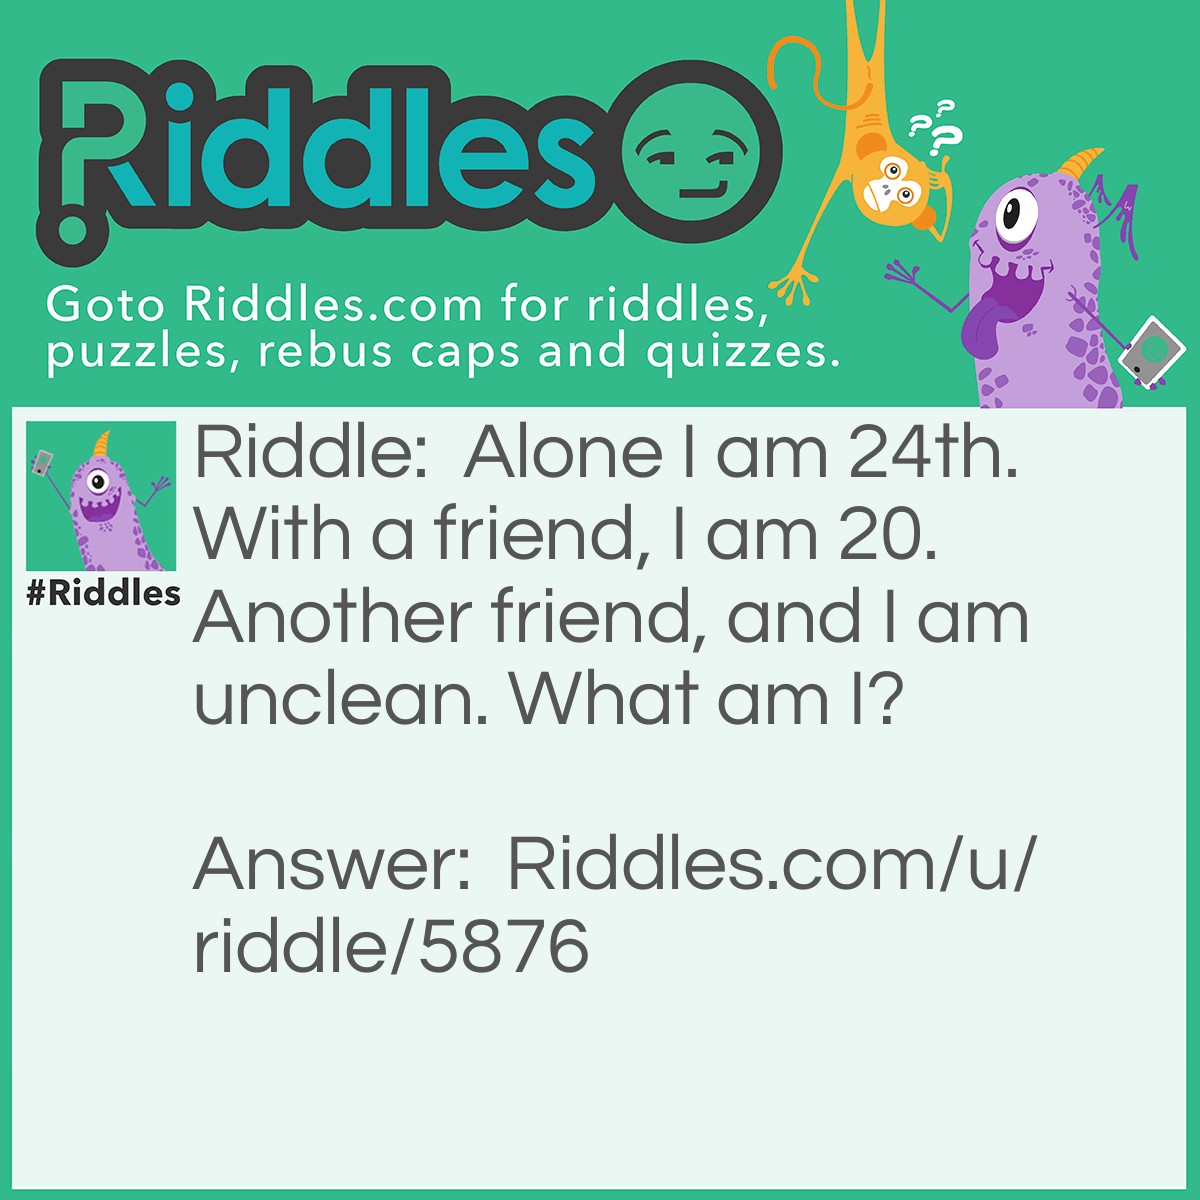 Riddle: Alone I am 24th. With a friend, I am 20. Another friend, and I am unclean. What am I? Answer: The letter X. It is the 24th letter of the alphabet, XX in Roman numerals is 20, and XXX is a label for movies that are inappropriate (unclean).